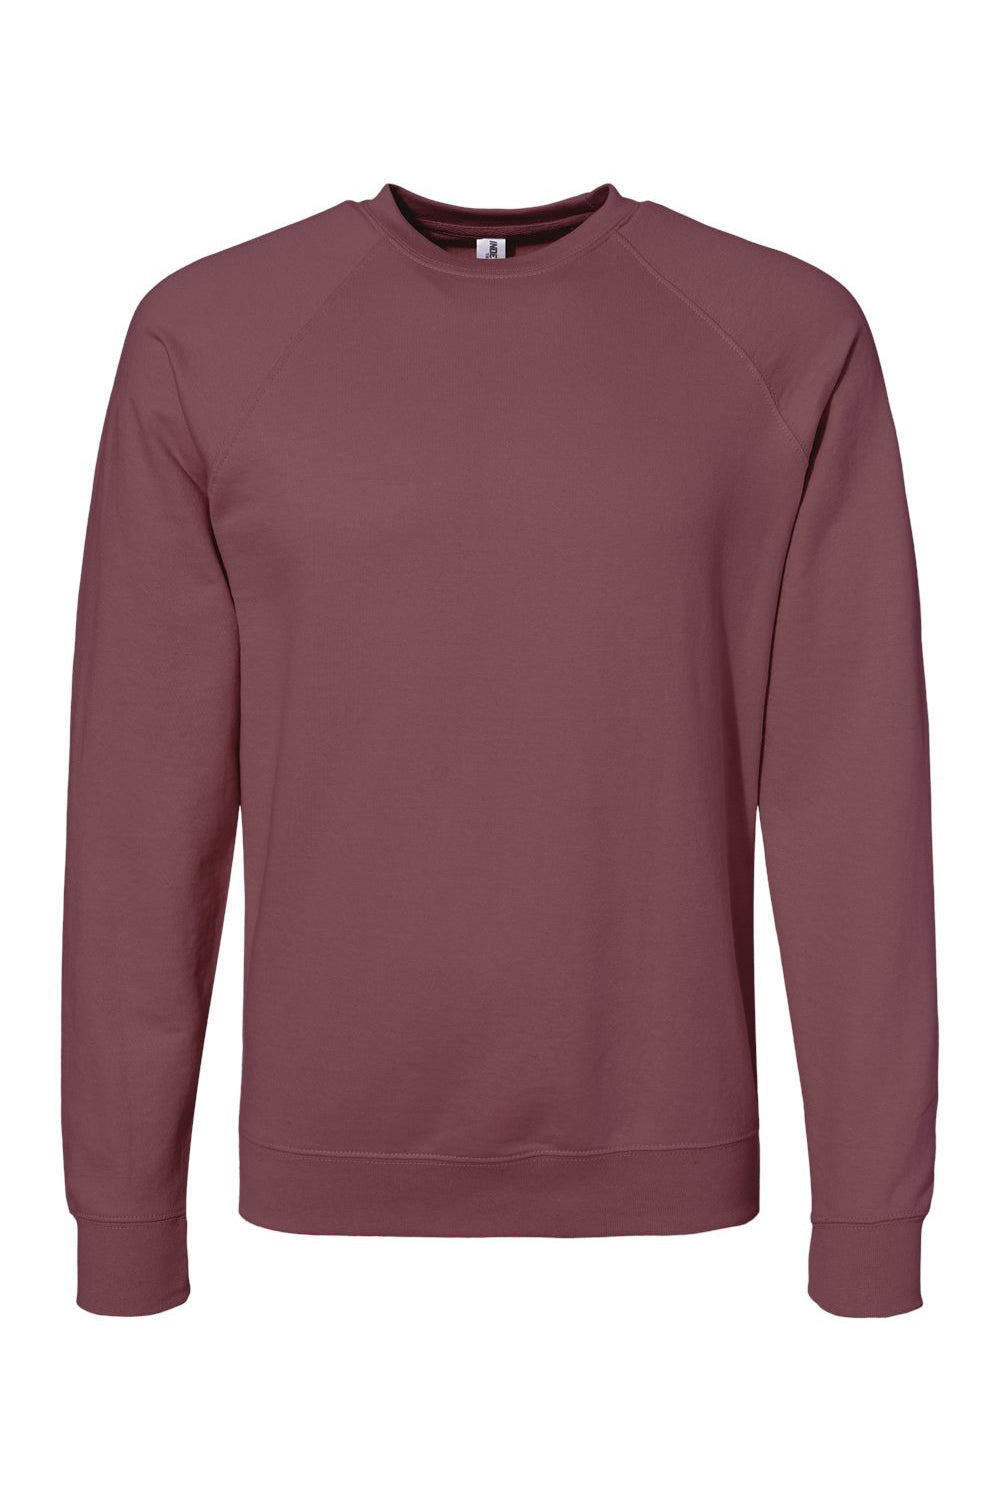 Independent Trading Co. SS1000C Mens Icon Loopback Terry Crewneck Sweatshirt Port Flat Front